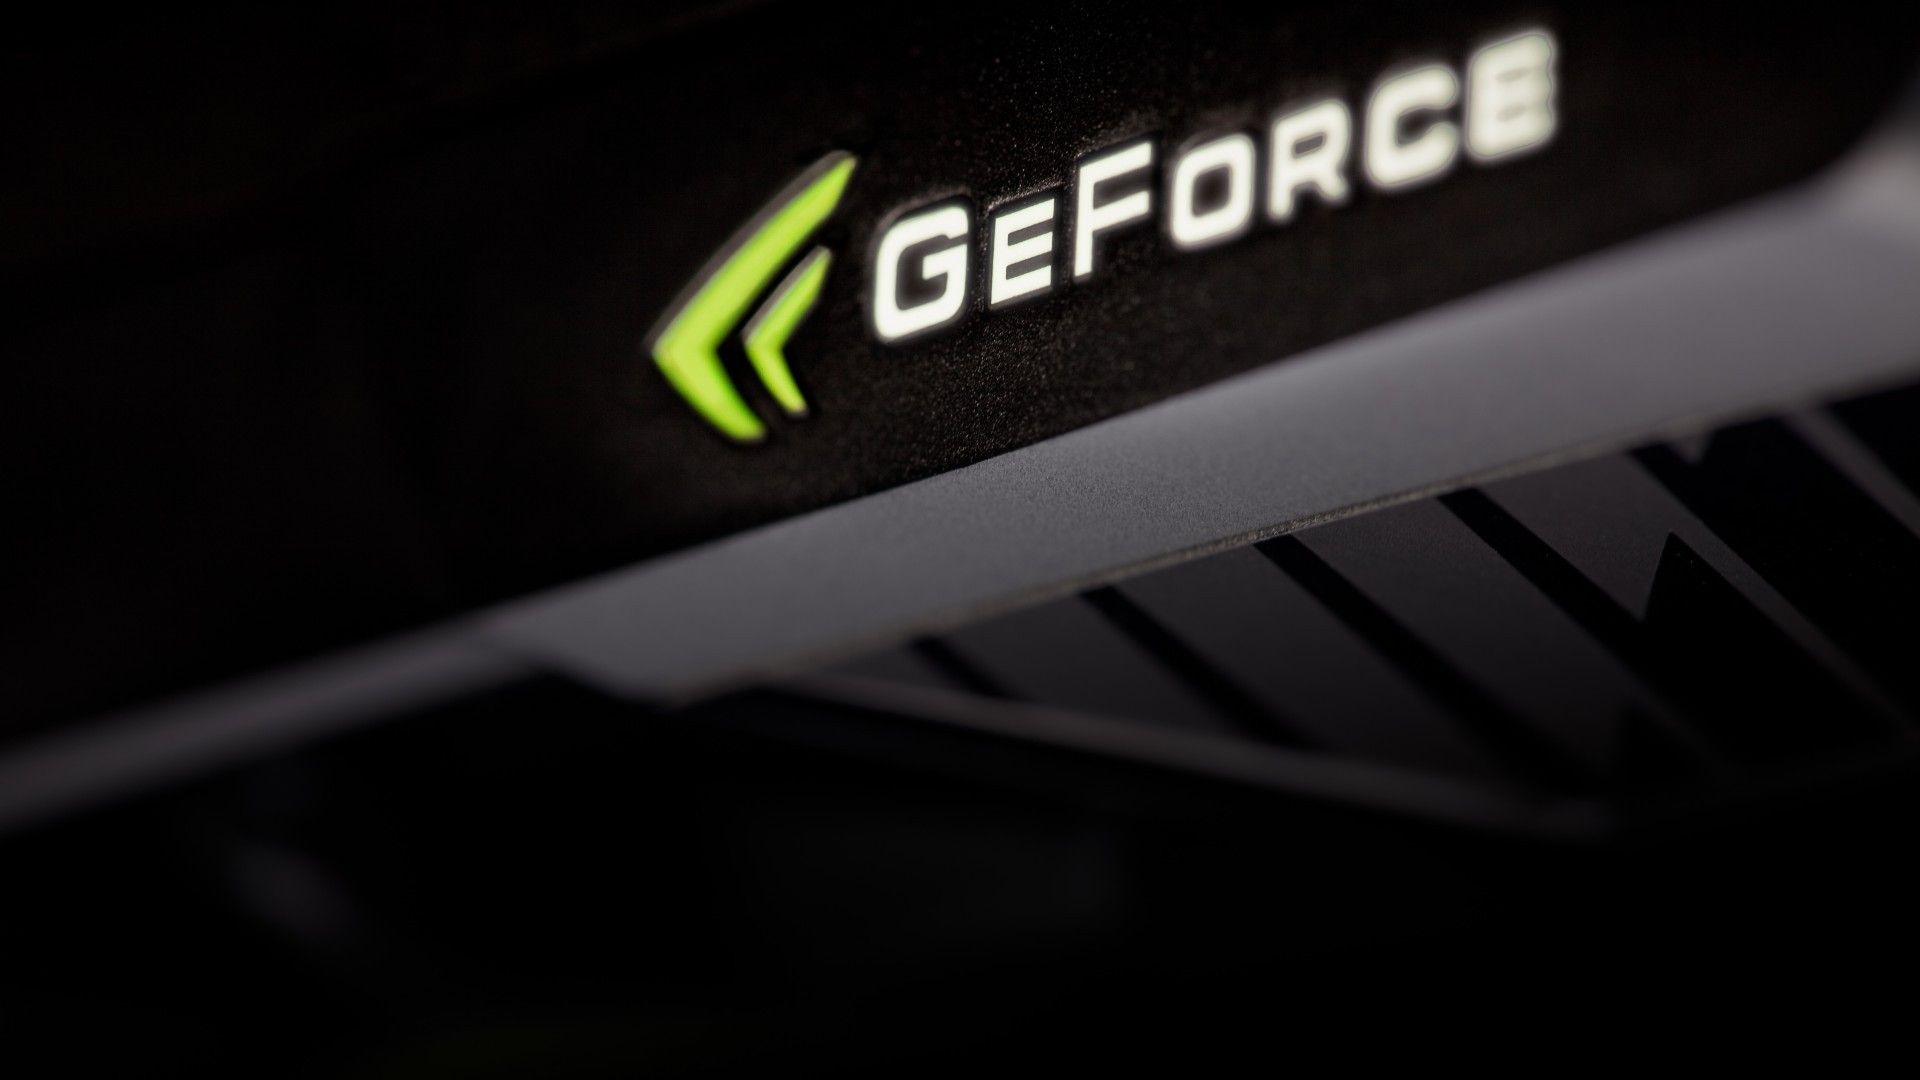 Download Nvidia Geforce Wallpaper 3479 1920x1080 px High ...